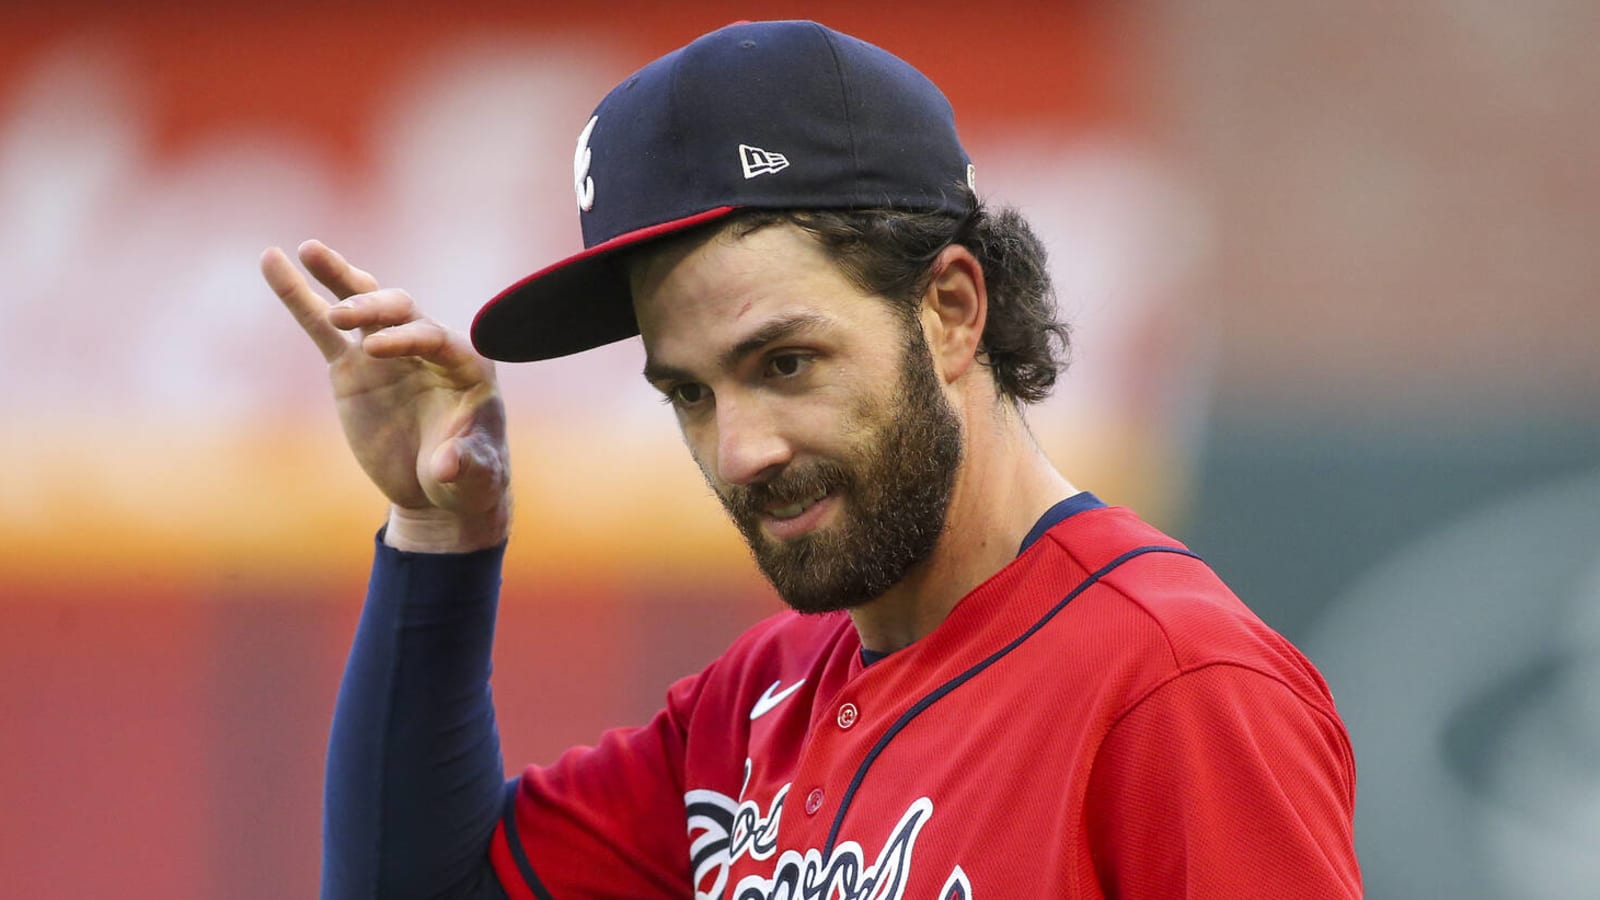 Braves, Dansby Swanson have reportedly had minimal negotiations